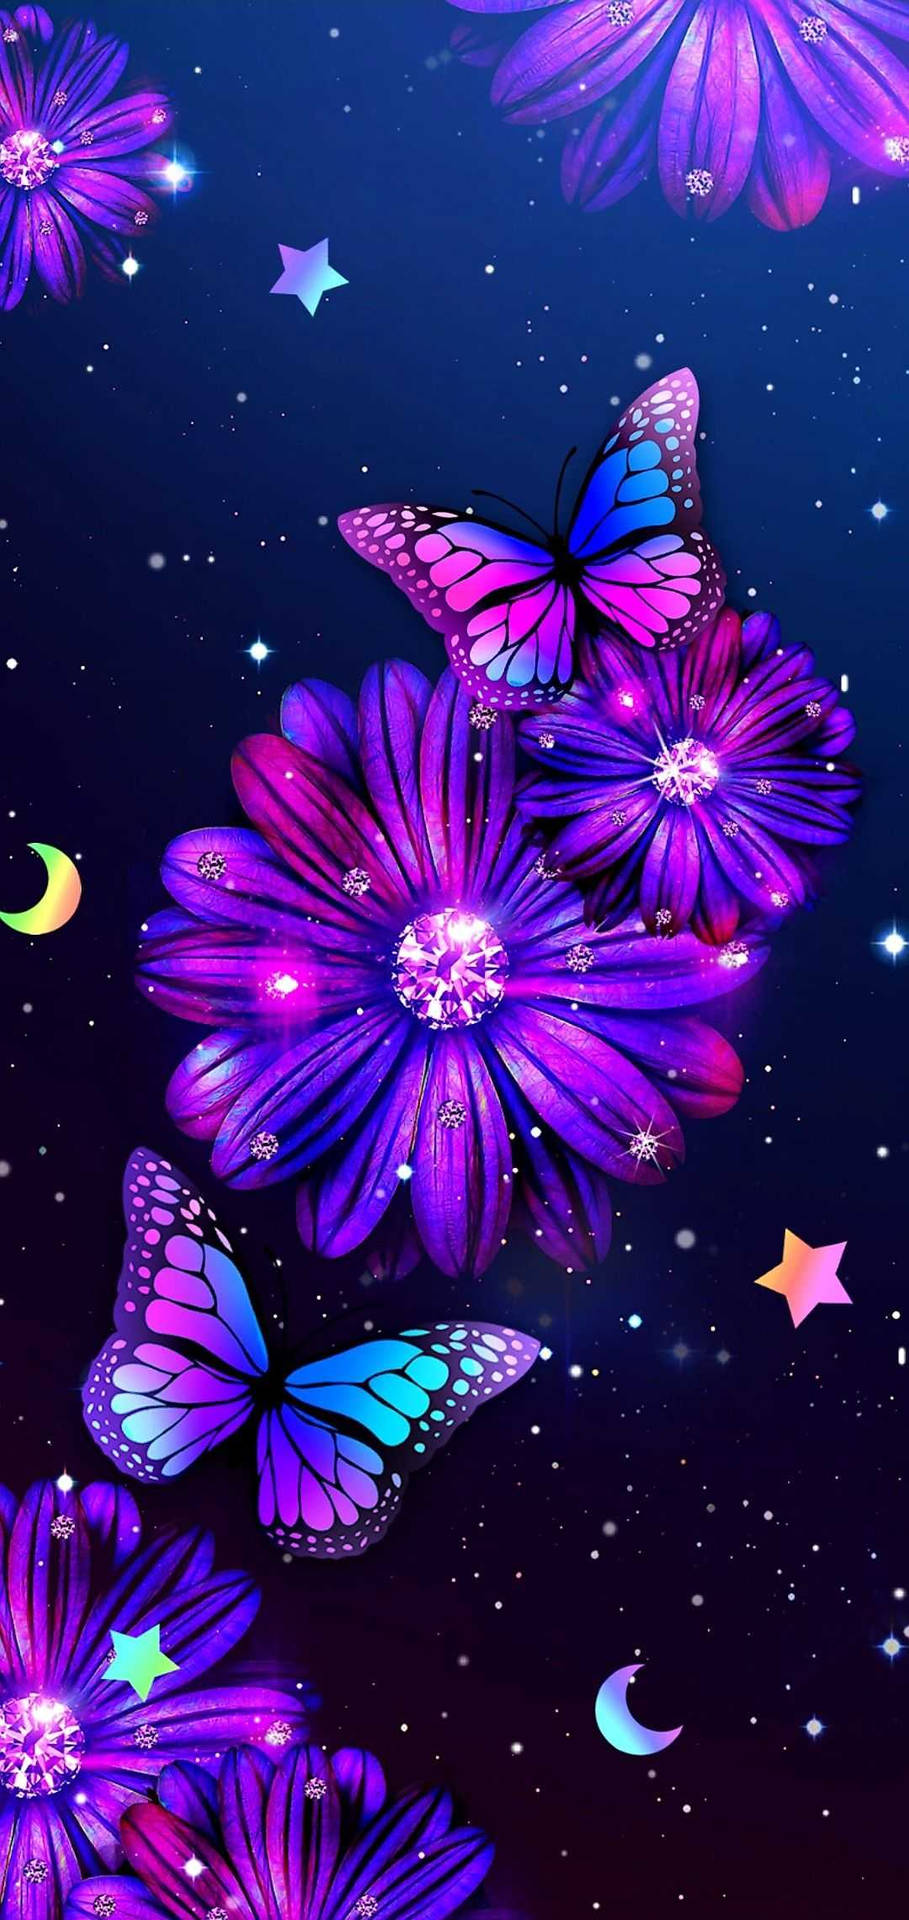 Iphone 7 Plus Space Flowers And Butterflies Wallpaper